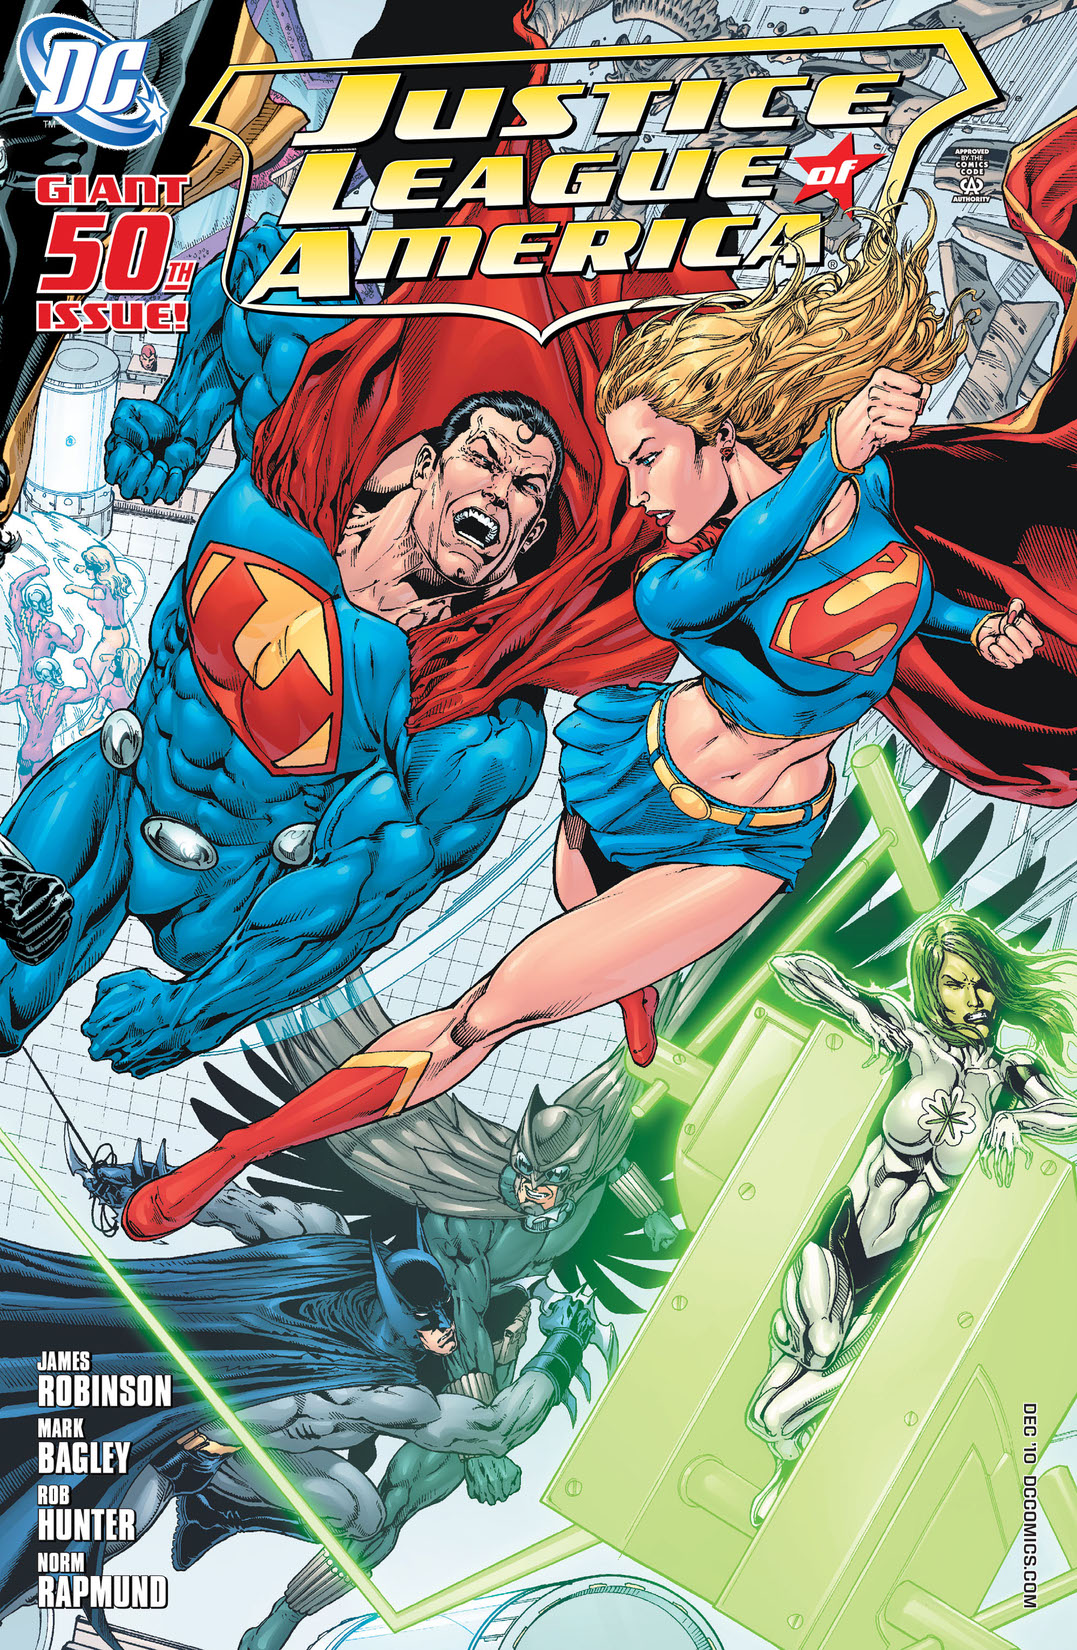 Justice League of America (2006-) #50 preview images